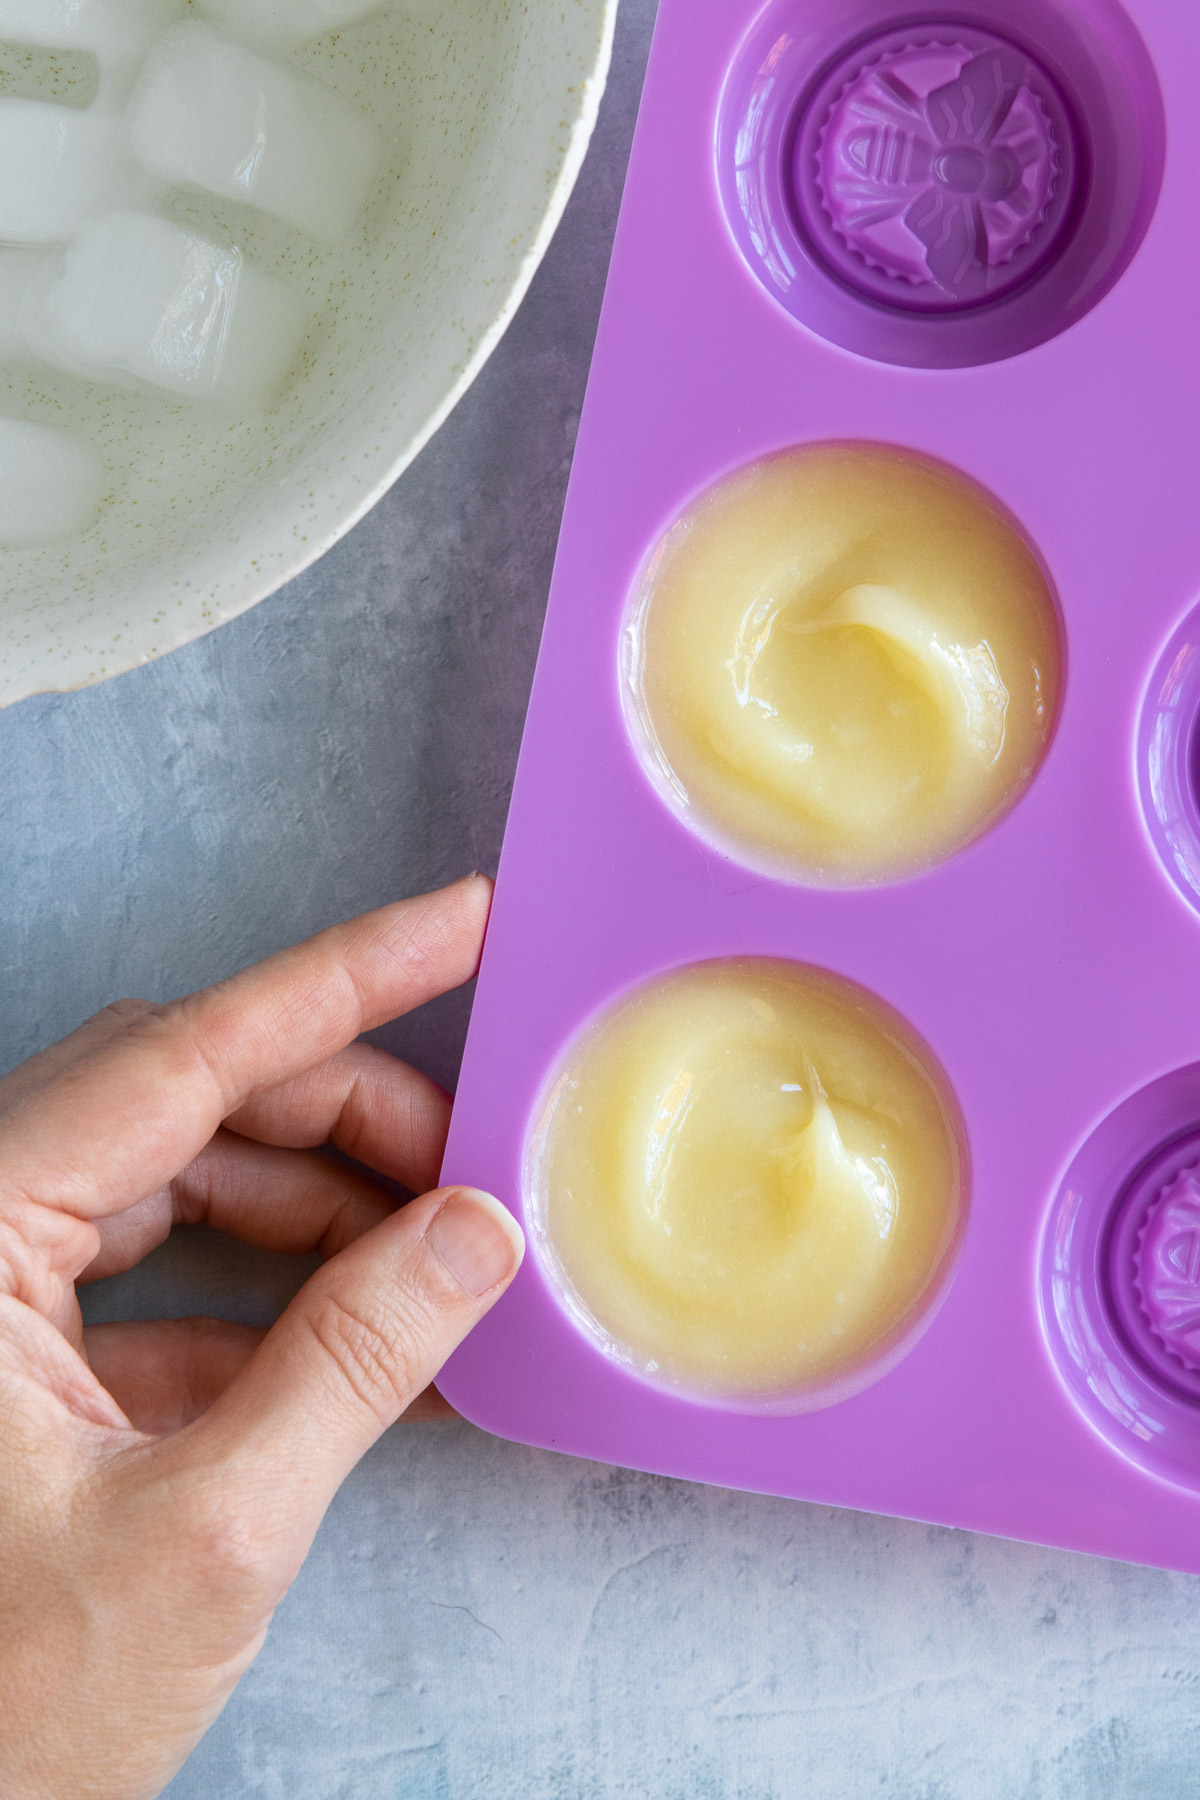 Letting oils and butters cool to harden for solid serum